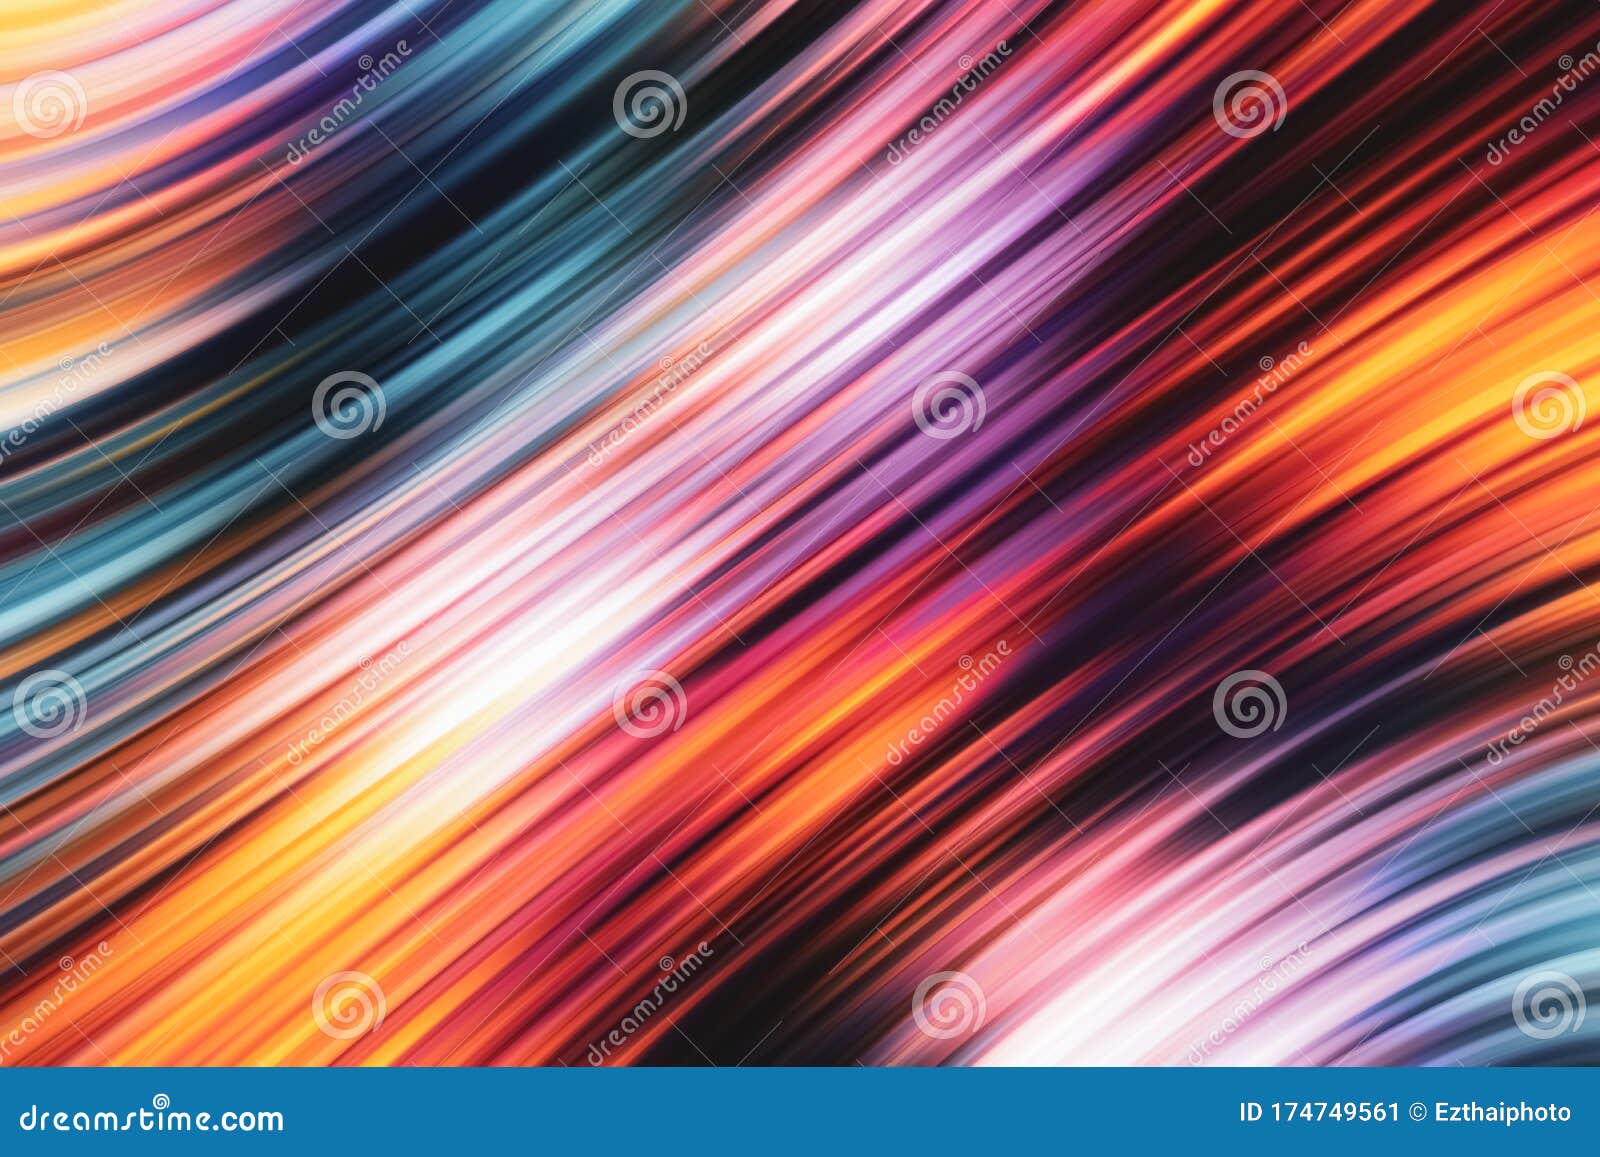 Colorful Rainbow Abstract Light Effect Illustration Texture Wallpaper 3D  Rendering. Vibrant Colorful Striped Pattern for Design Stock Illustration -  Illustration of color, artistic: 174749561